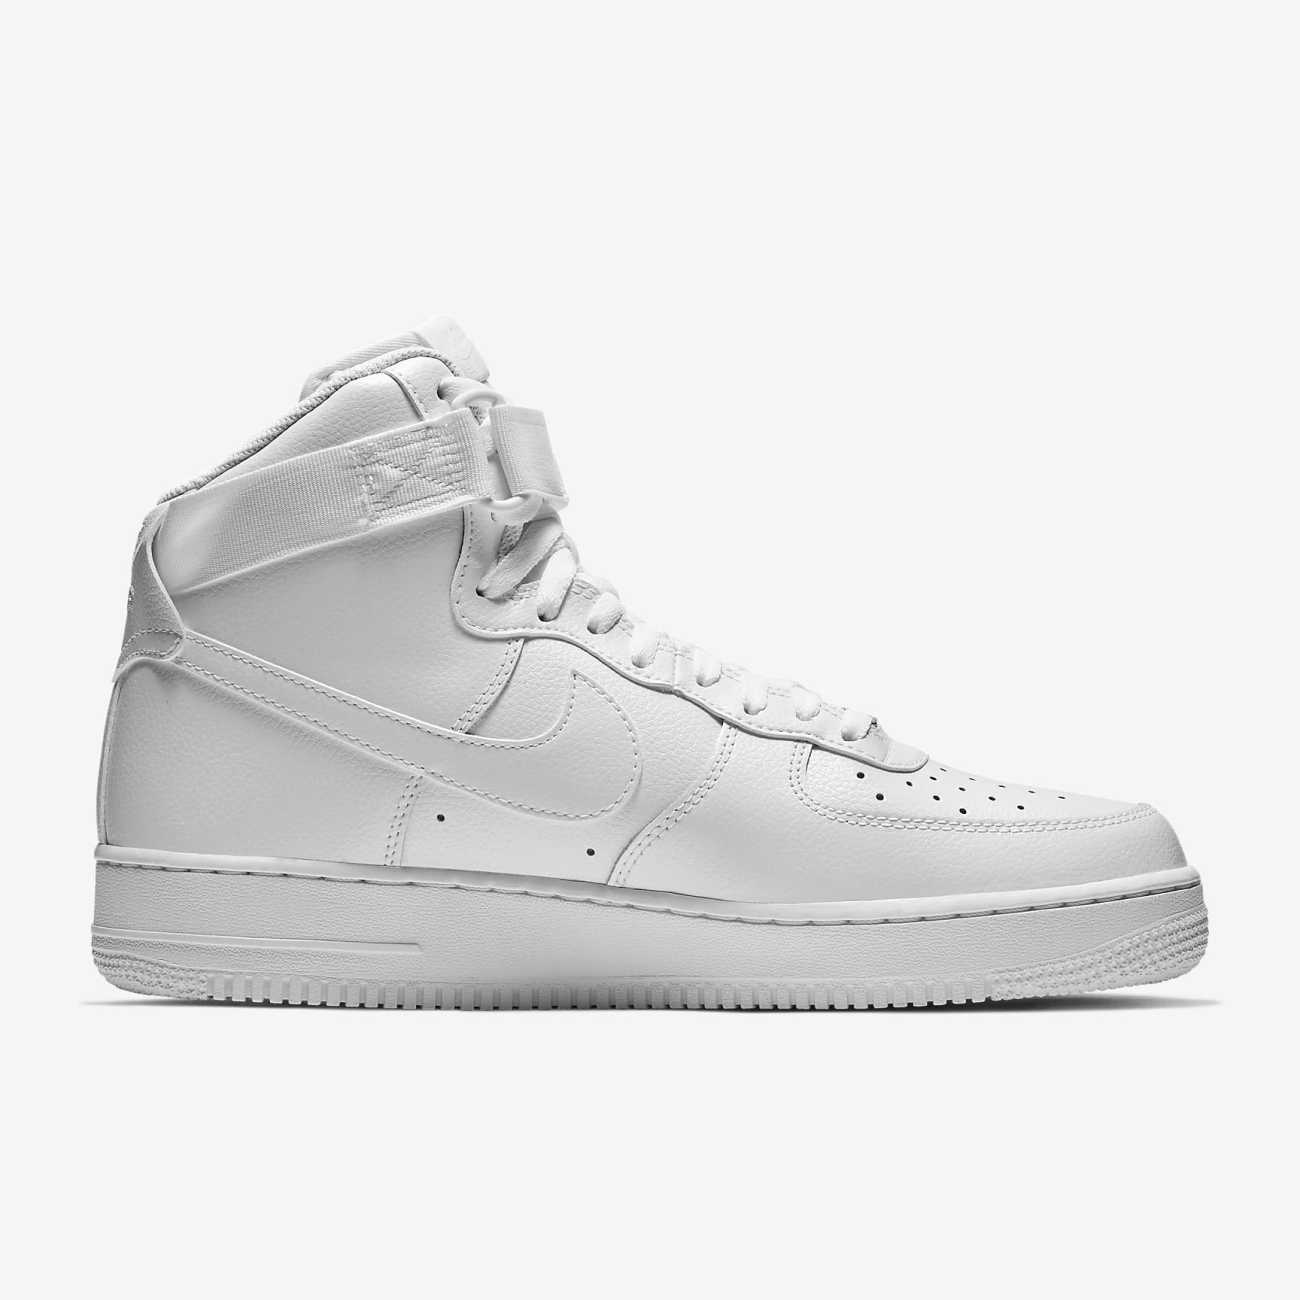 Nike Air Force 1 High White | Buy Online At The Best Price In Accra